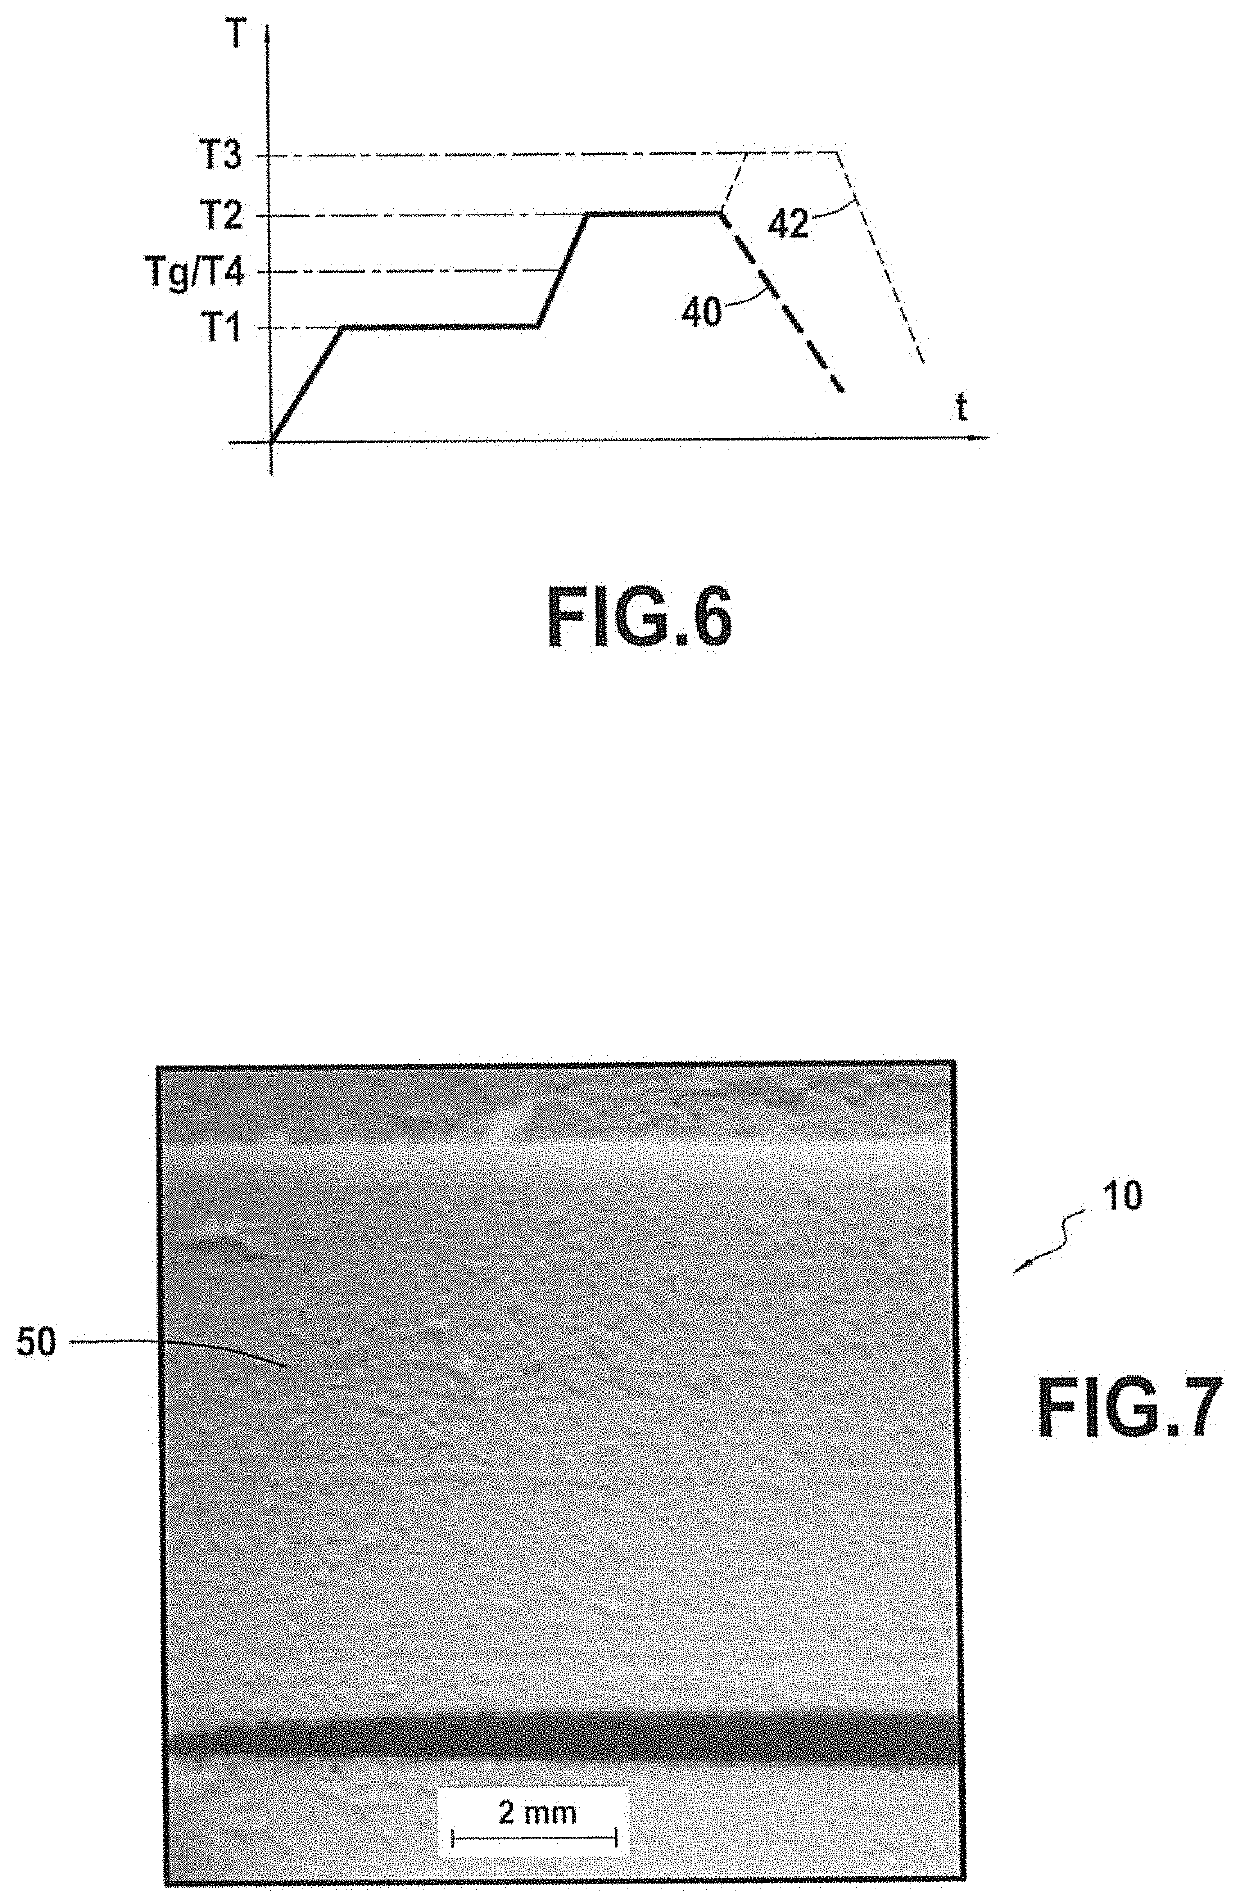 Method for manufacturing a porous abradable coating made of ceramic material